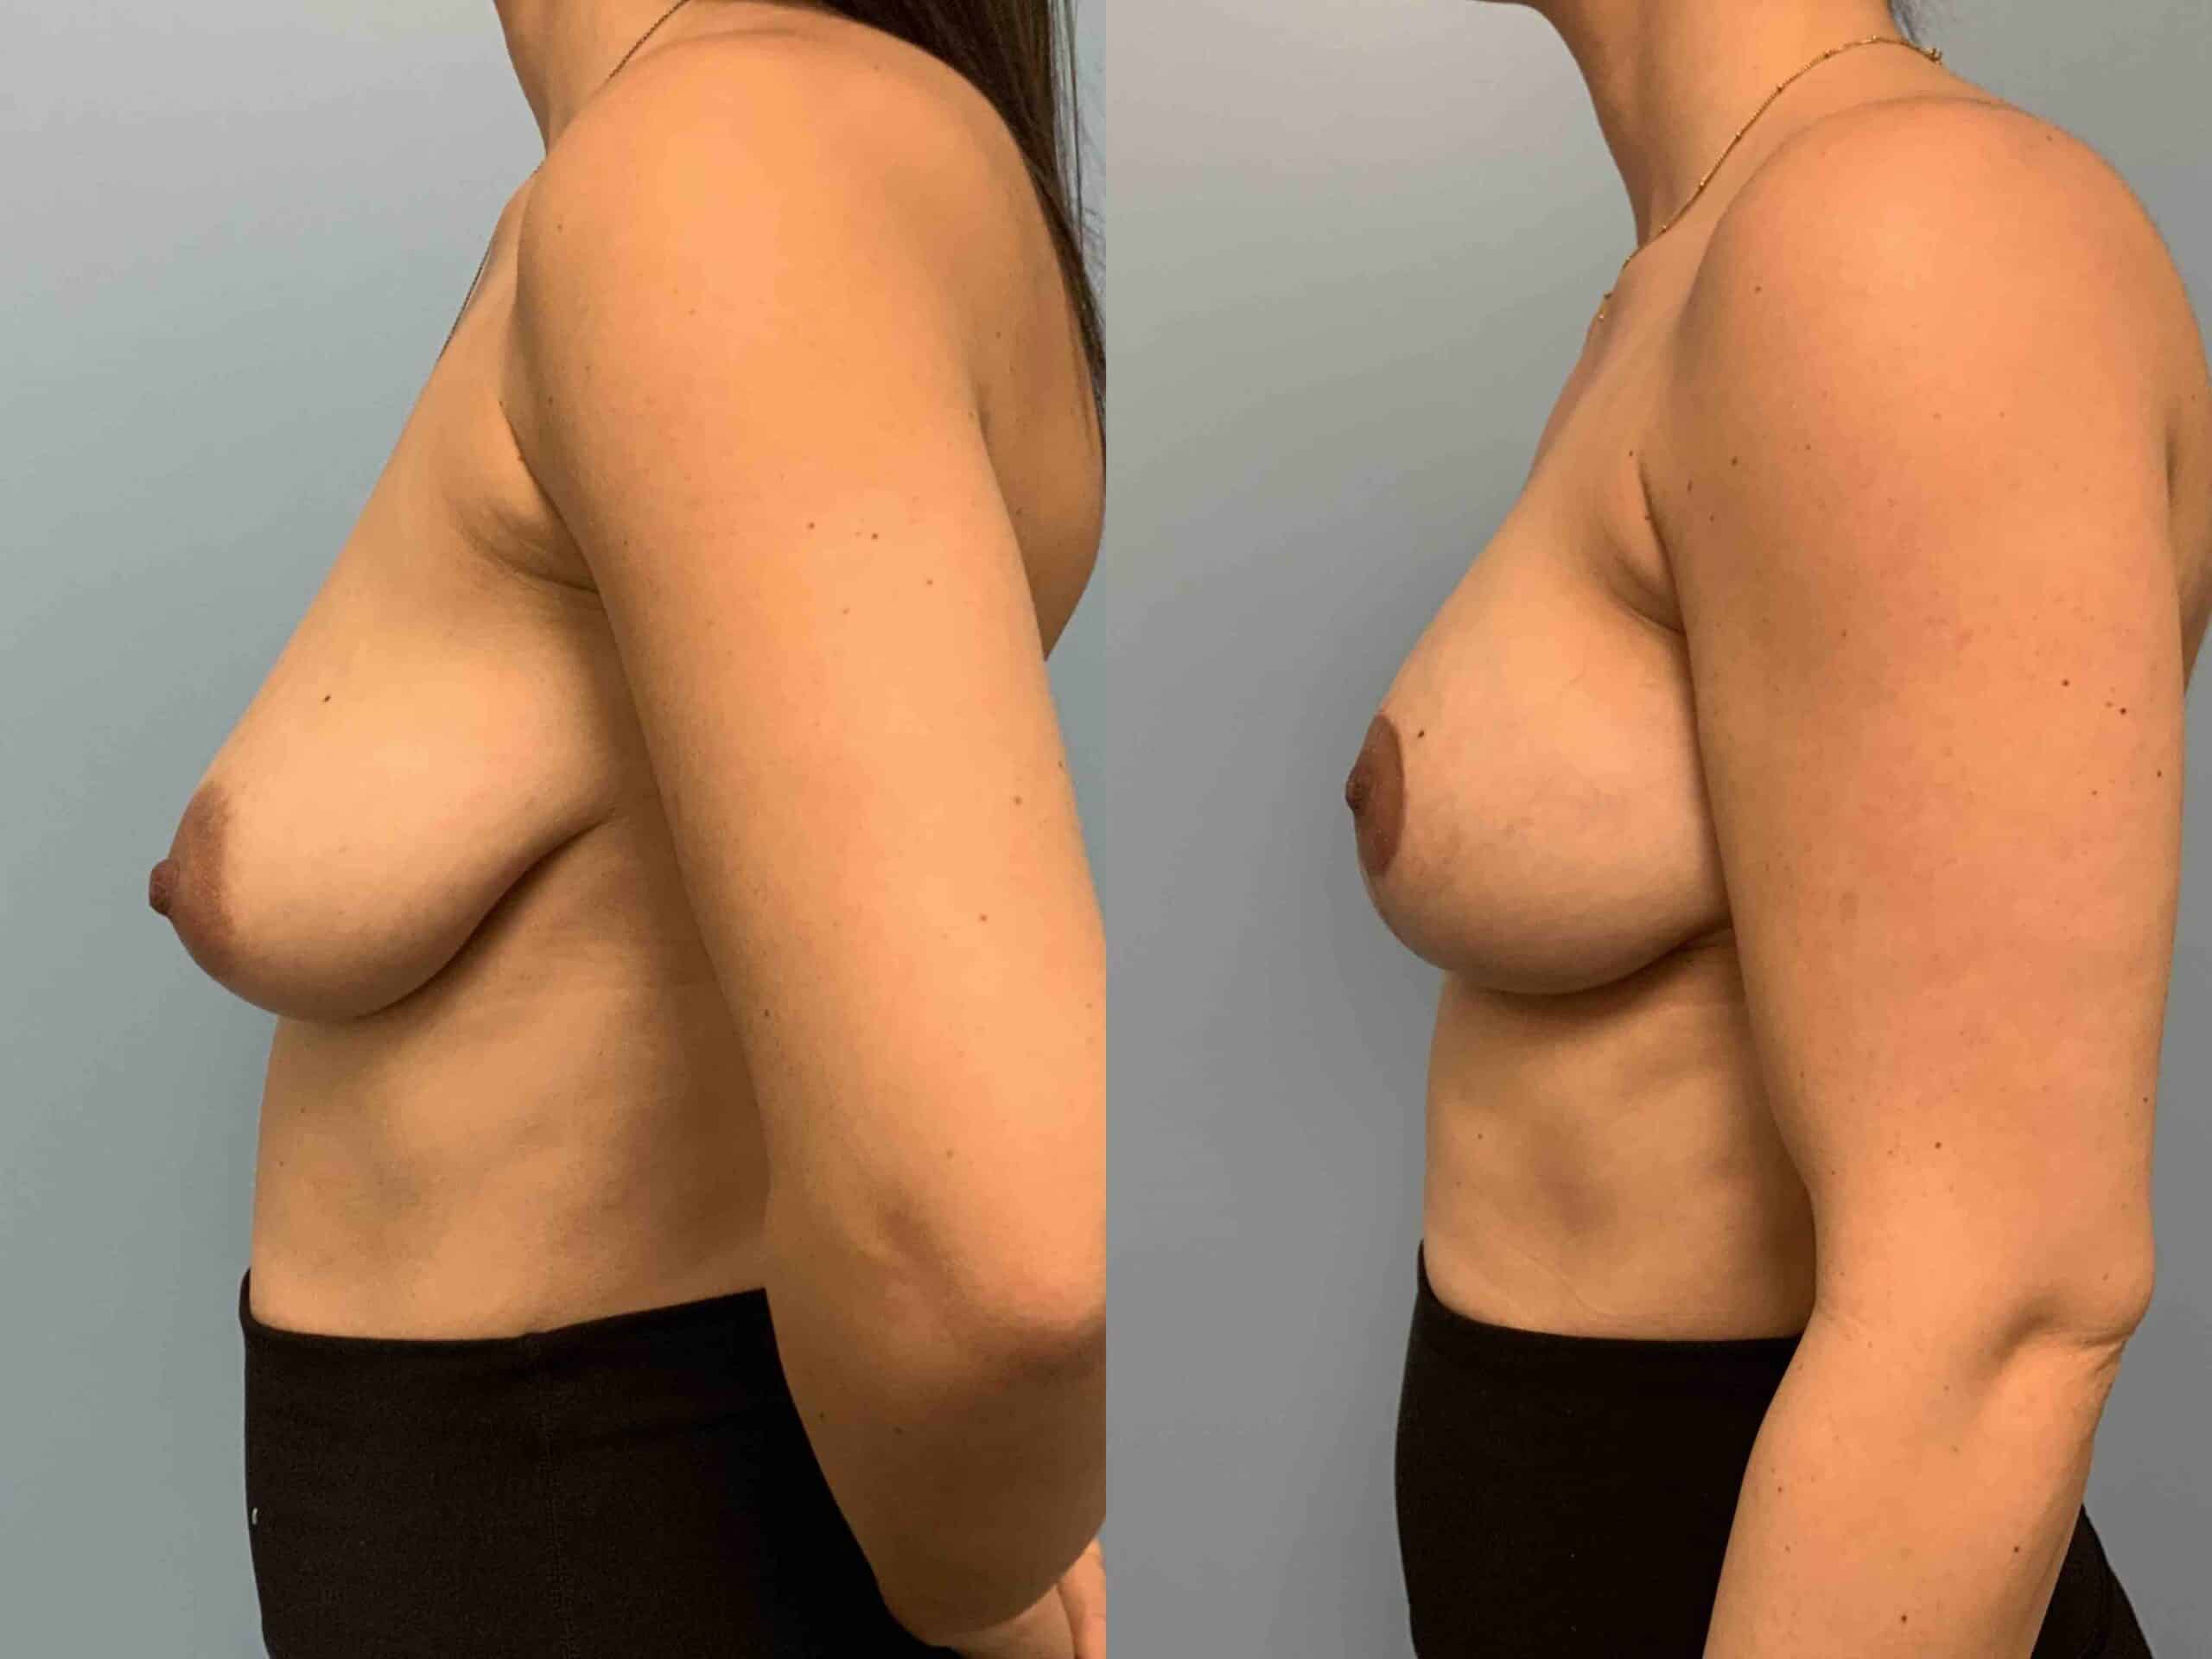 Before and after, patient 1 mo post op from Breast Lift, Wise Pattern Mastopexy procedures performed by Dr. Paul Vanek